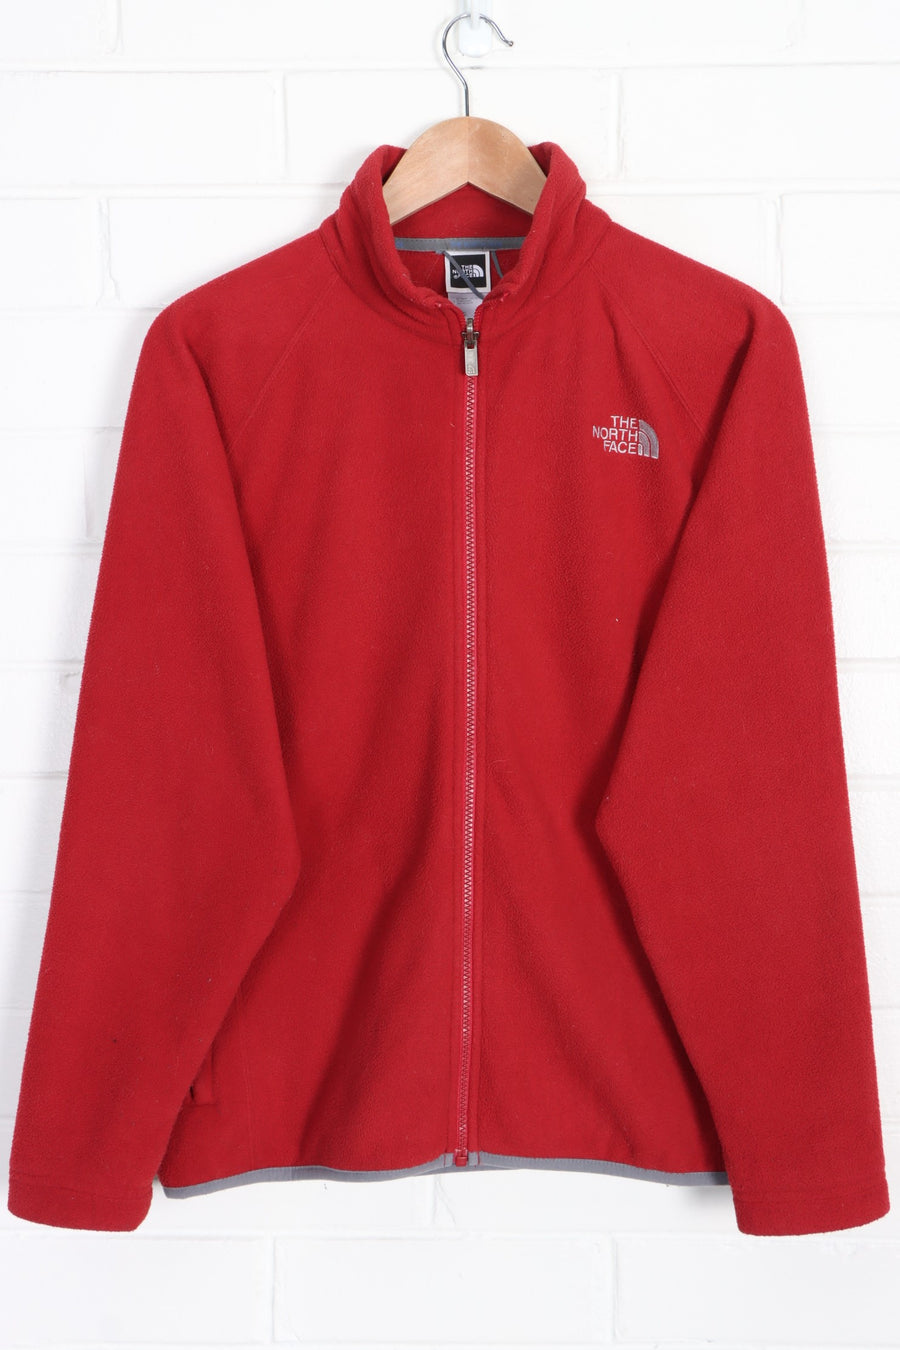 THE NORTH FACE Red Lightweight Fleece Jacket (L)